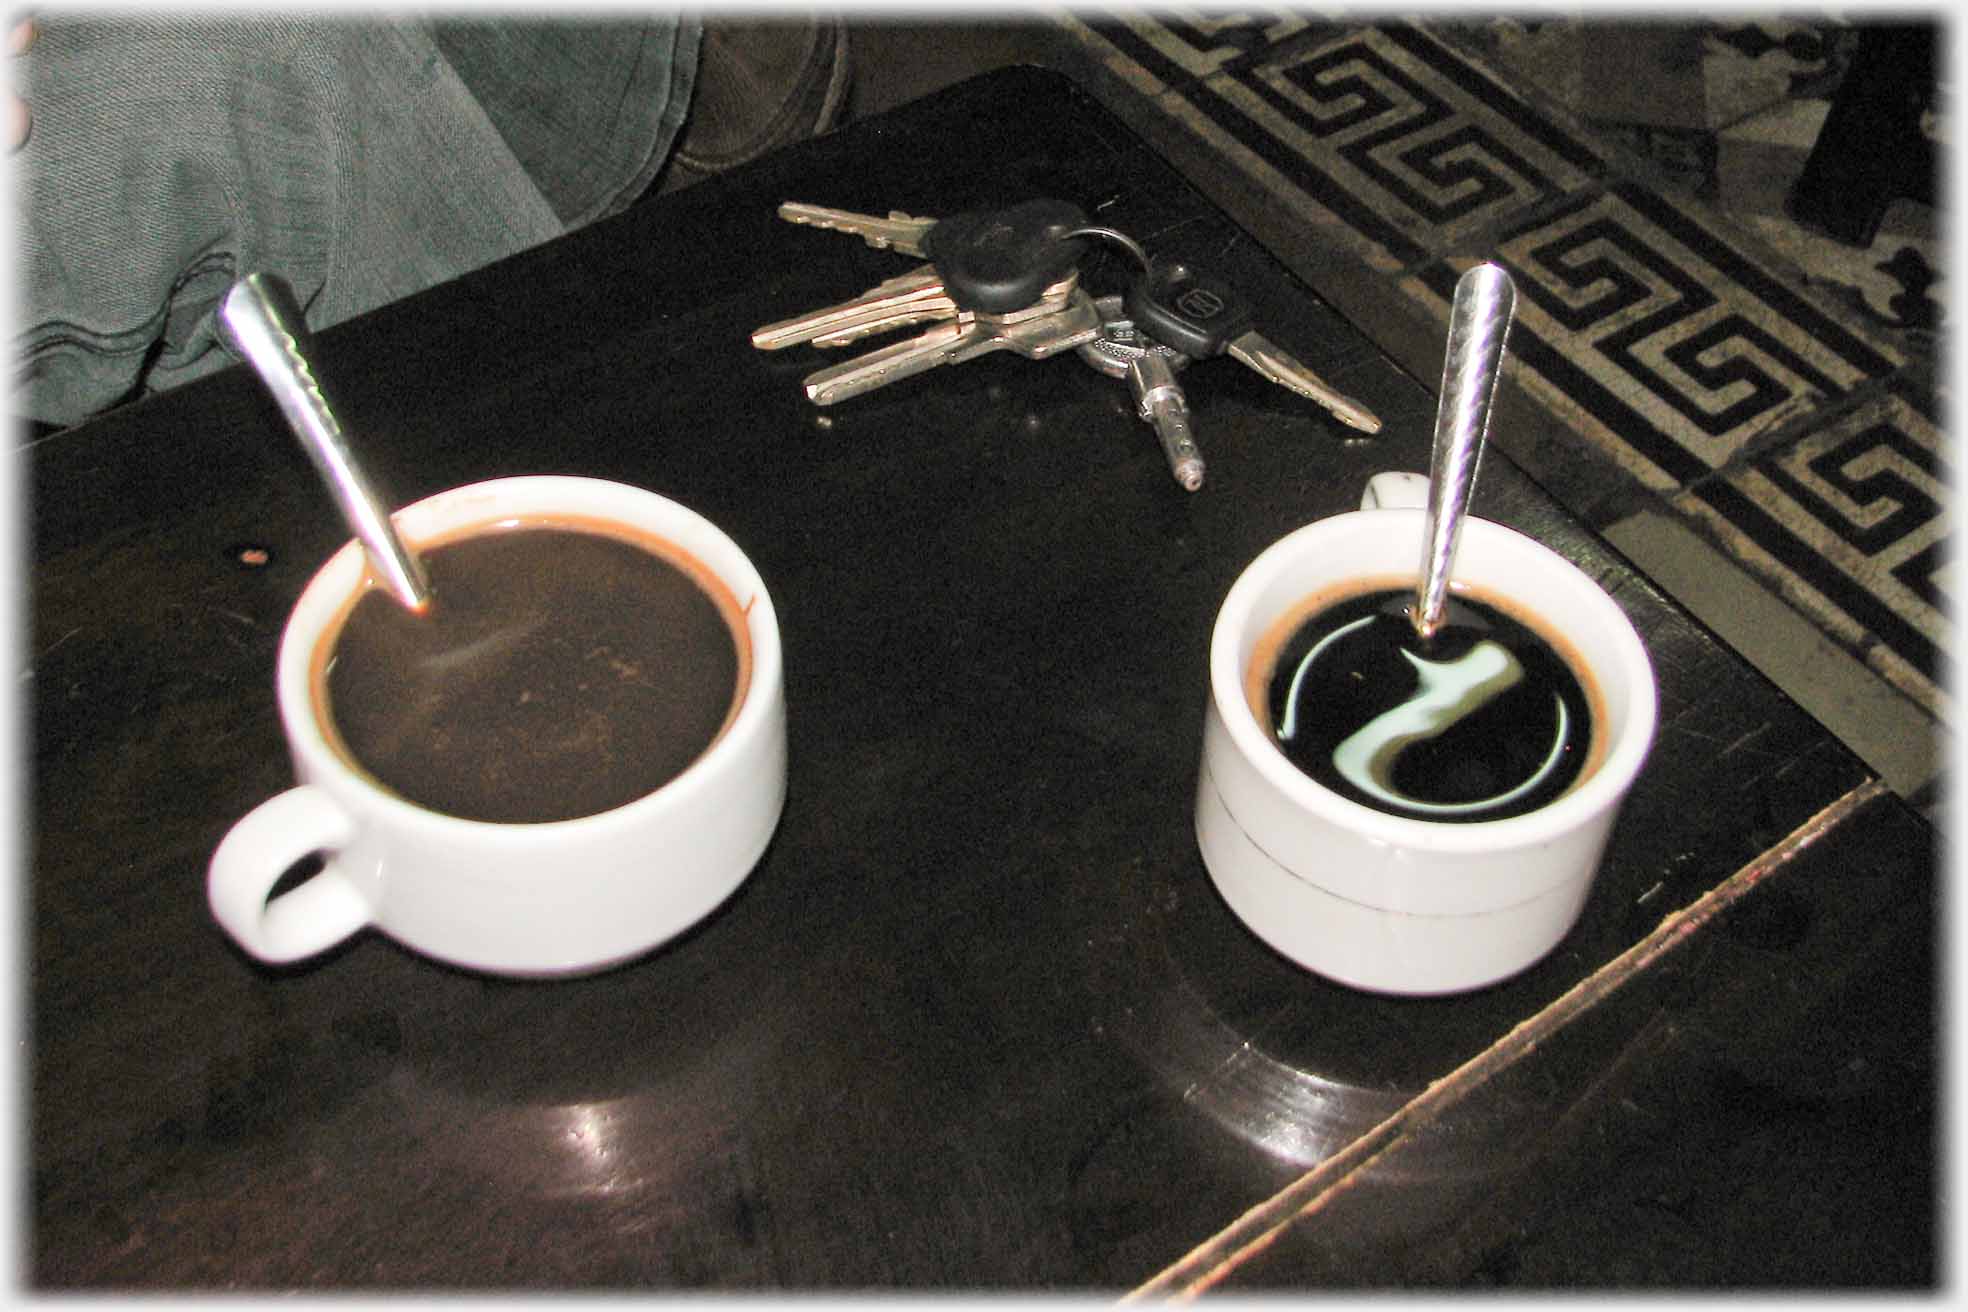 Two small coffee cups with spoons in them, and keys on table.